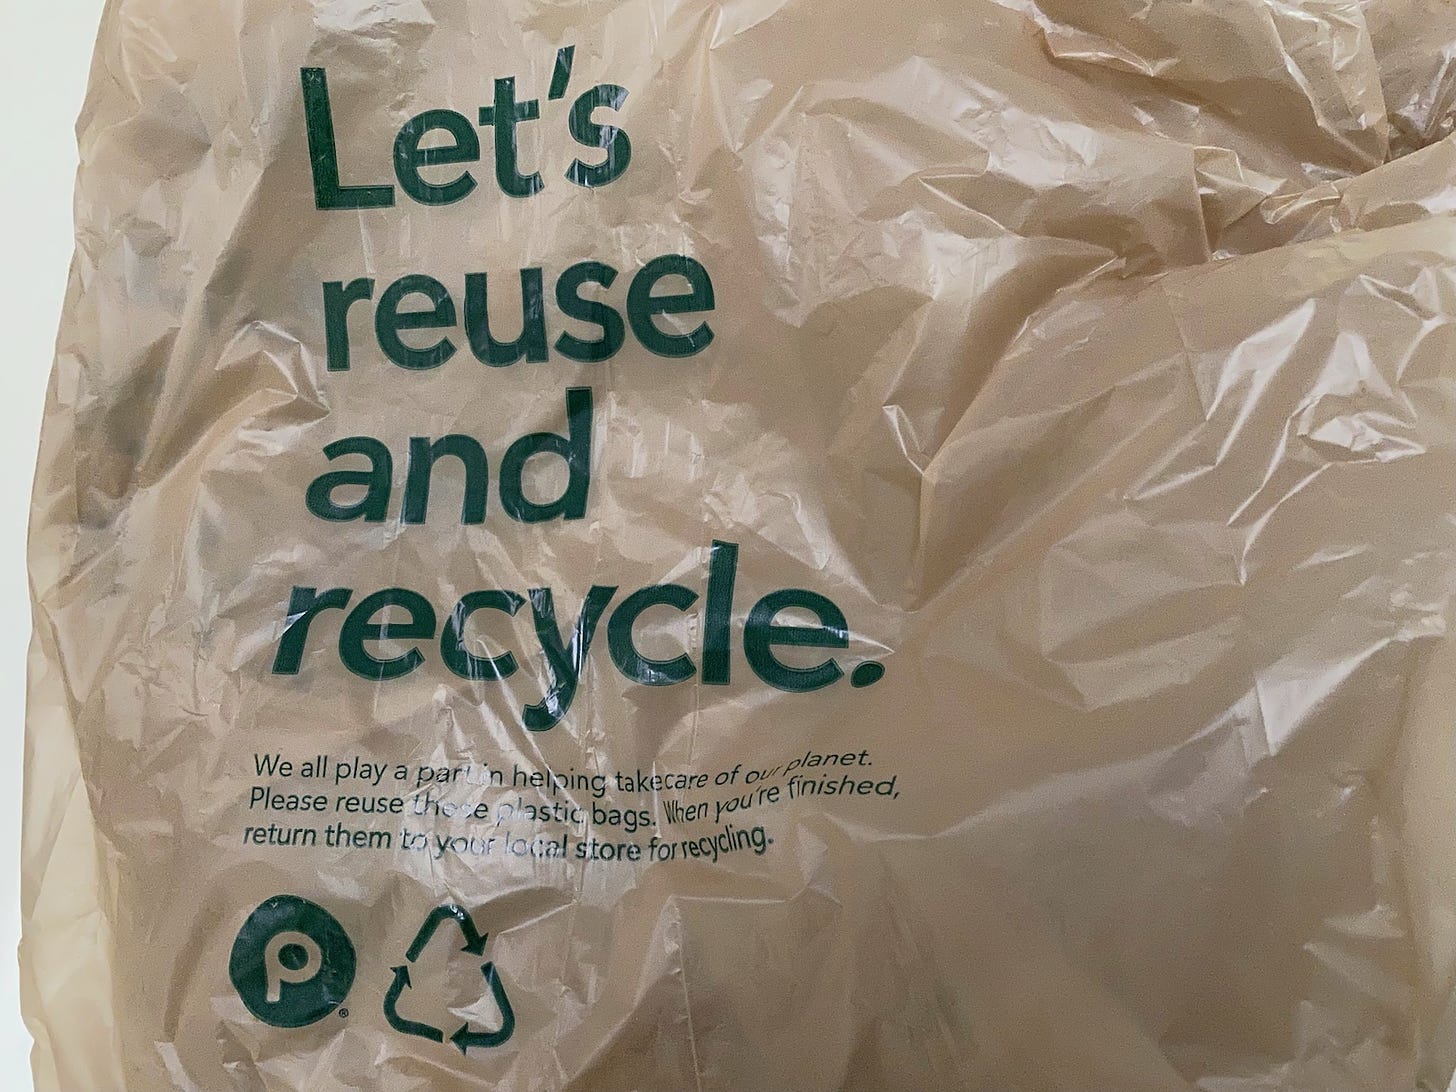 Plastic bag with text: Let's reuse and recycle